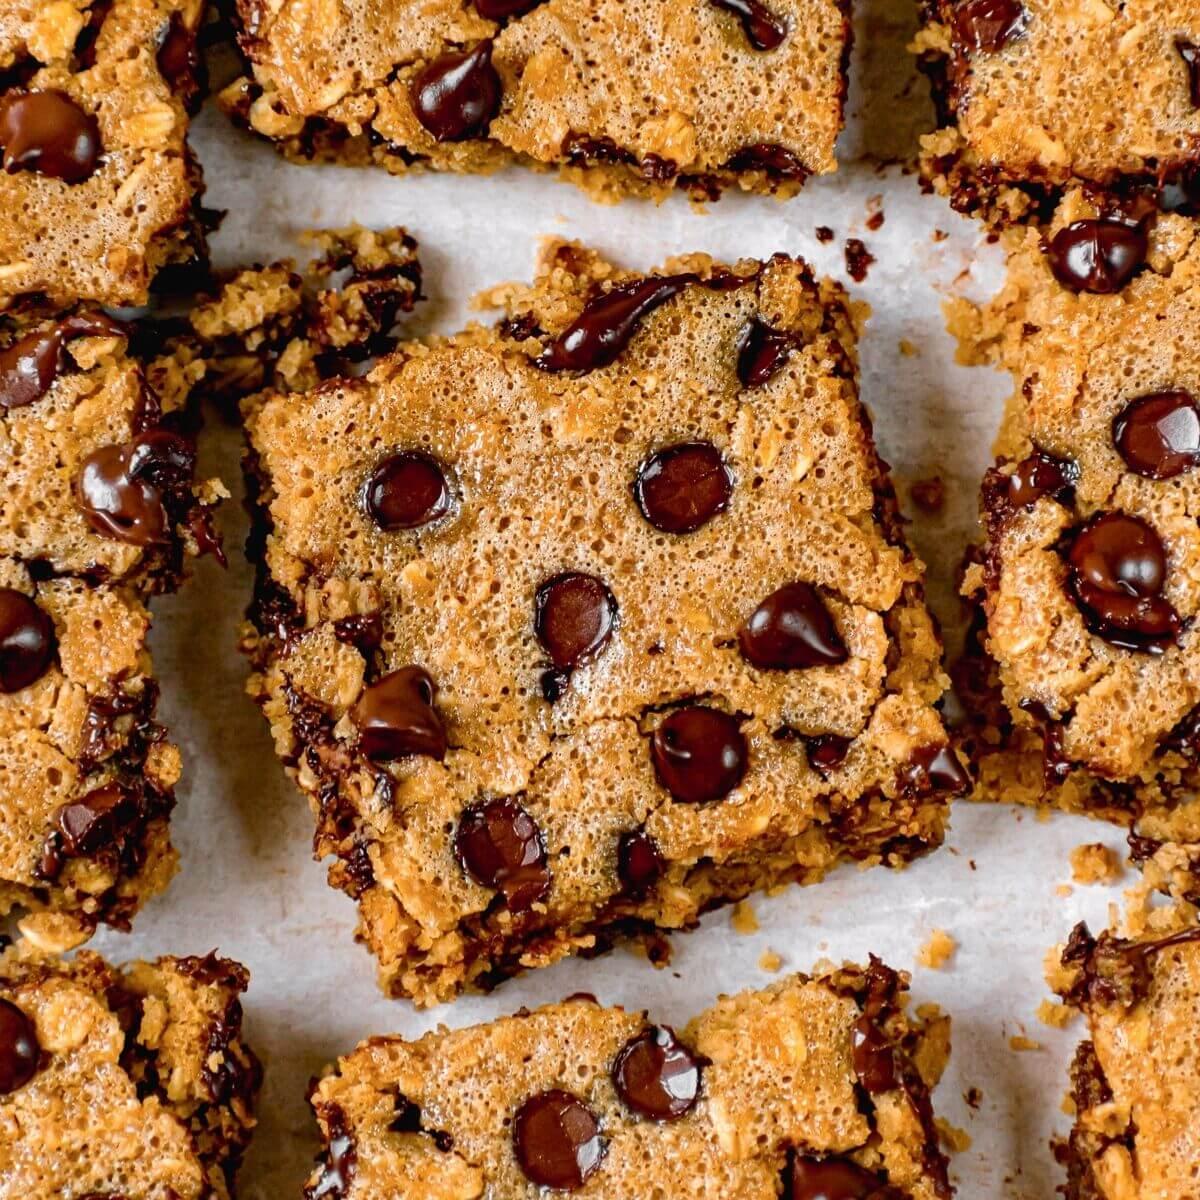 Chocolate Chip and Nut Oatmeal Squares